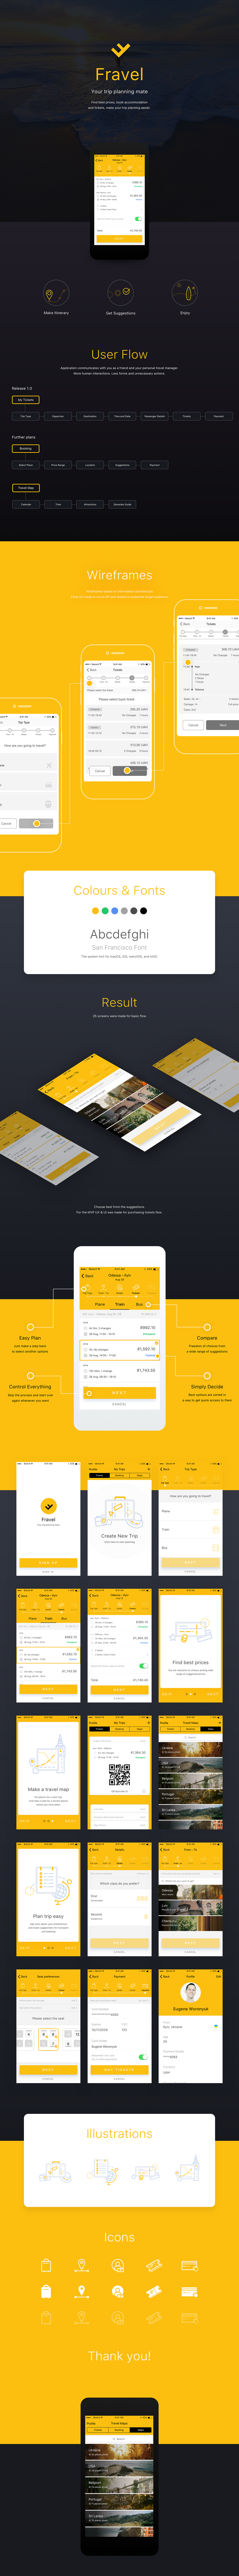 ux UI ios wireframes visual Travel SAAS application mobile concept